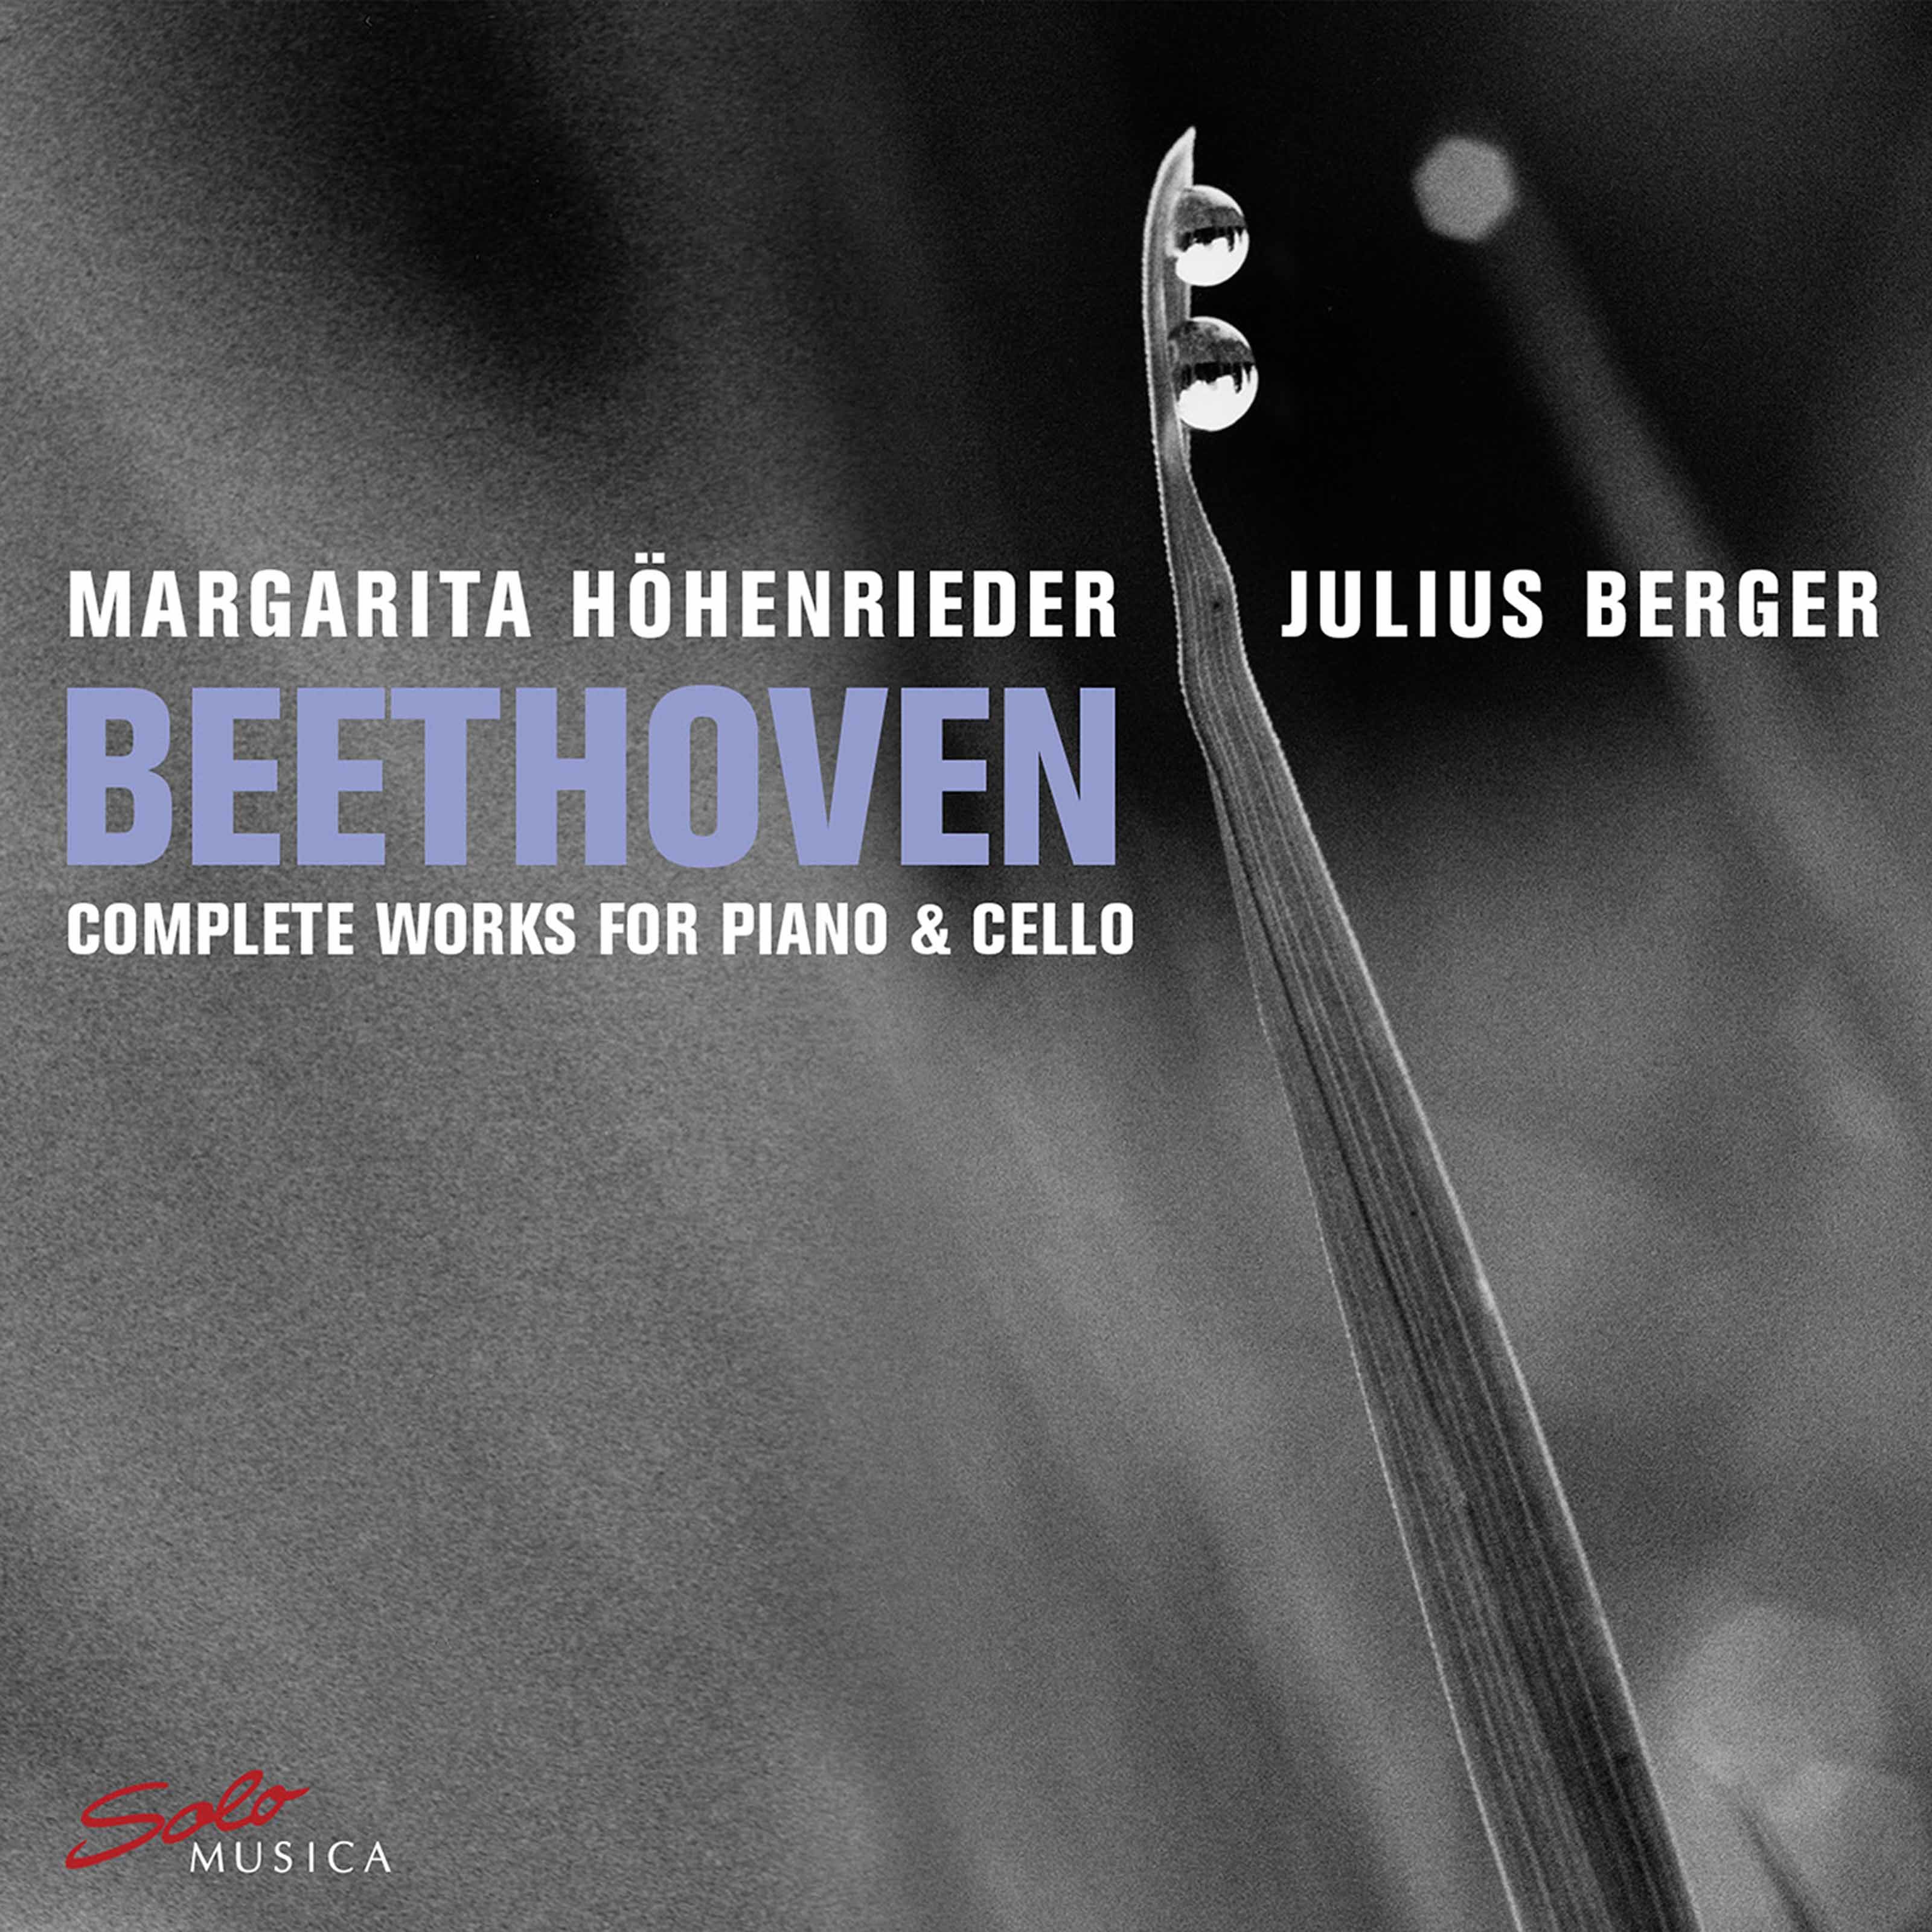 Margarita Hohenrieder, Julius Berger – Beethoven Complete Works for Piano & Cello (2020) [FLAC 24bit/96kHz]